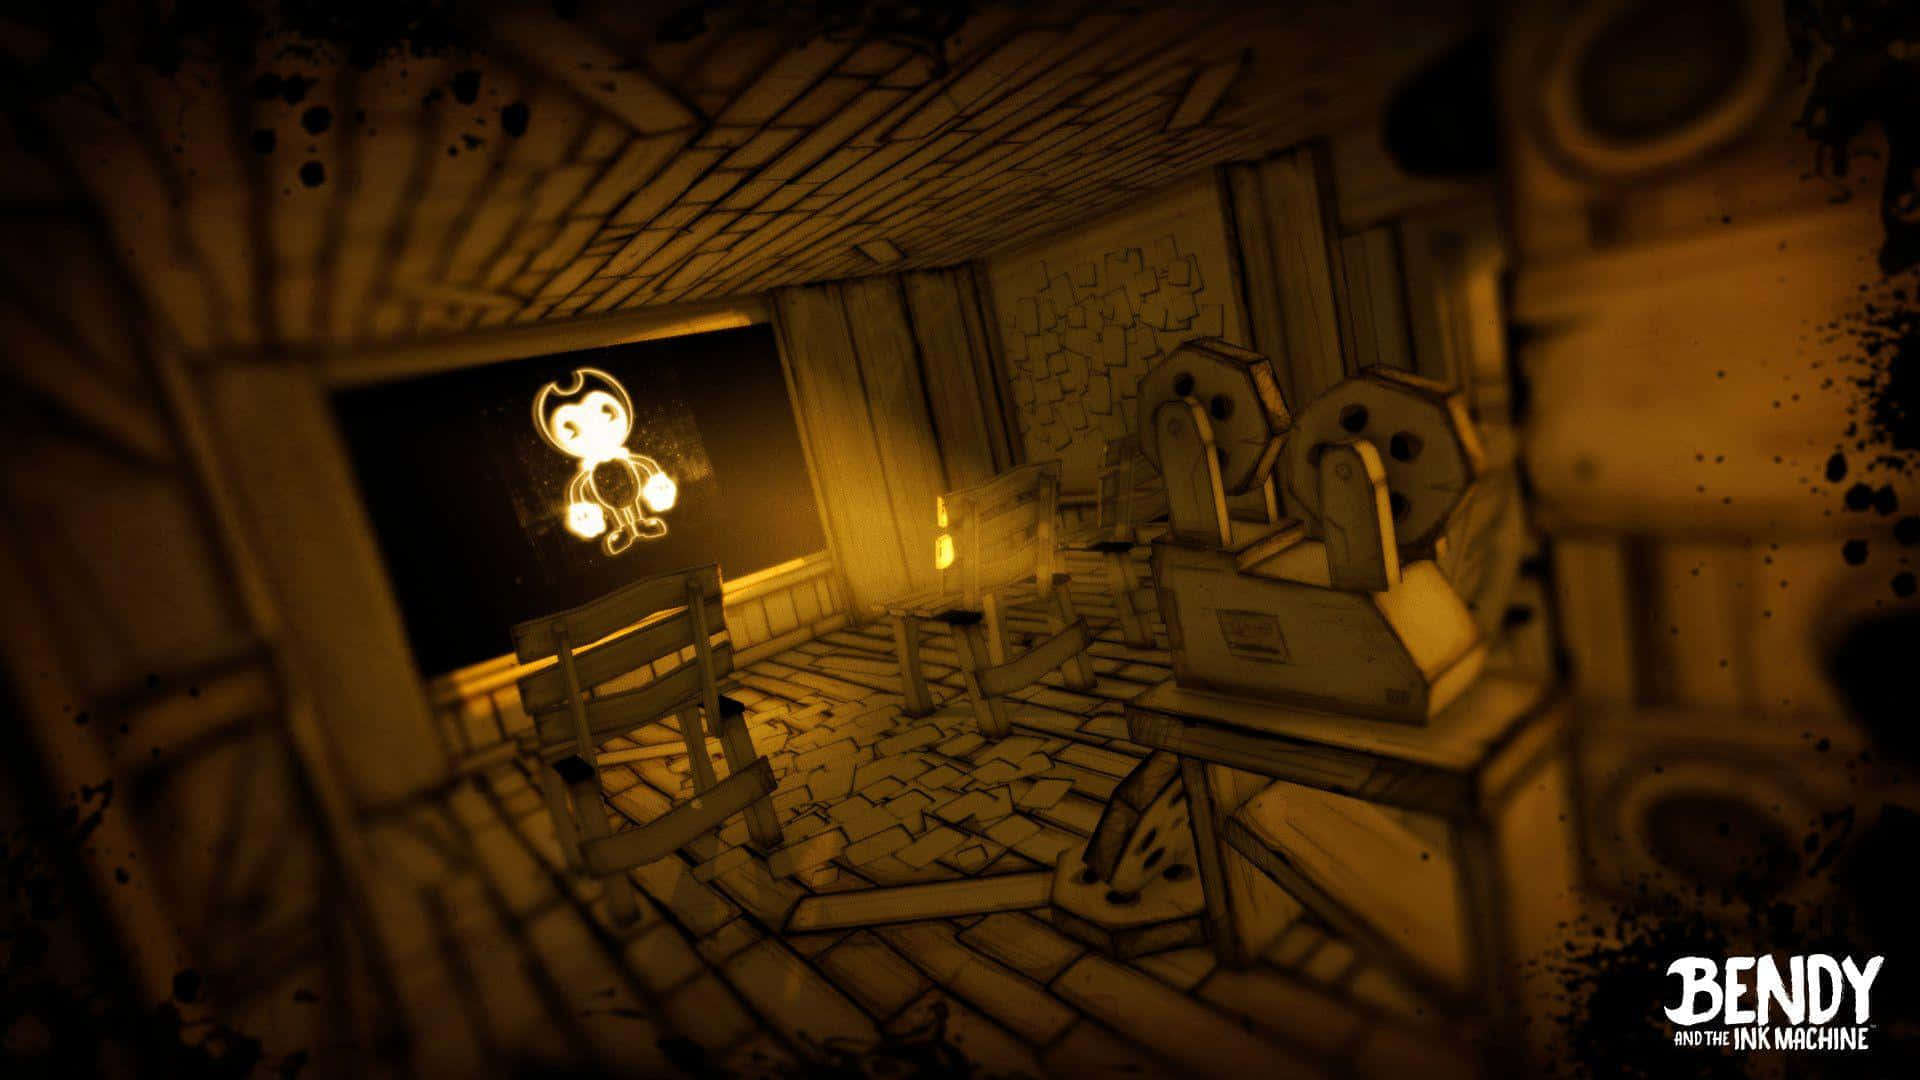 Discover the mysteries of Joey Drew Studios with Bendy and the Ink Machine!